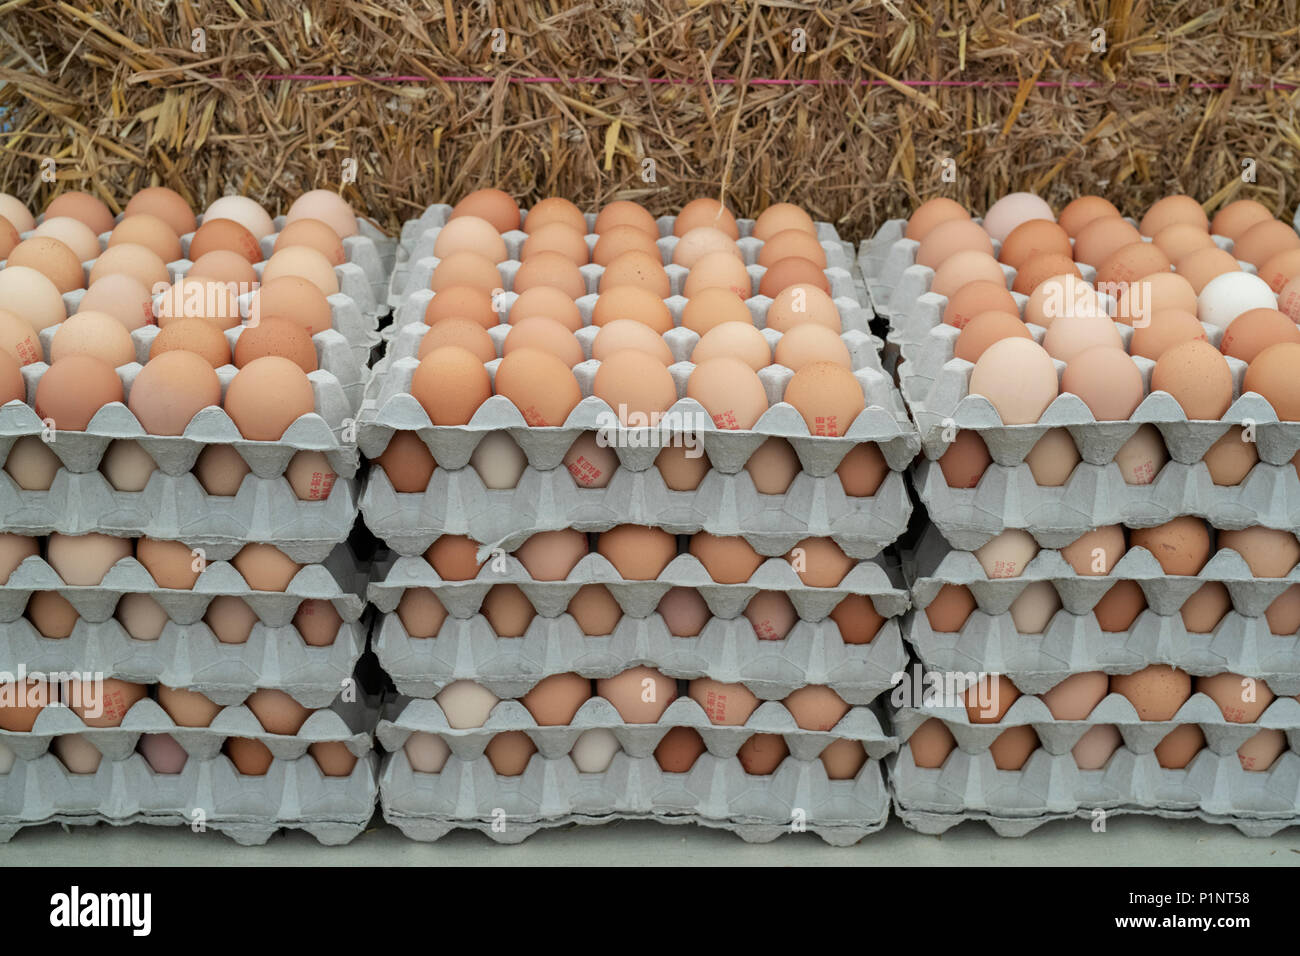 https://c8.alamy.com/comp/P1NT58/organic-eggs-in-trays-for-sale-at-daylesford-organic-farm-shop-summer-festival-daylesford-cotswolds-gloucestershire-england-P1NT58.jpg